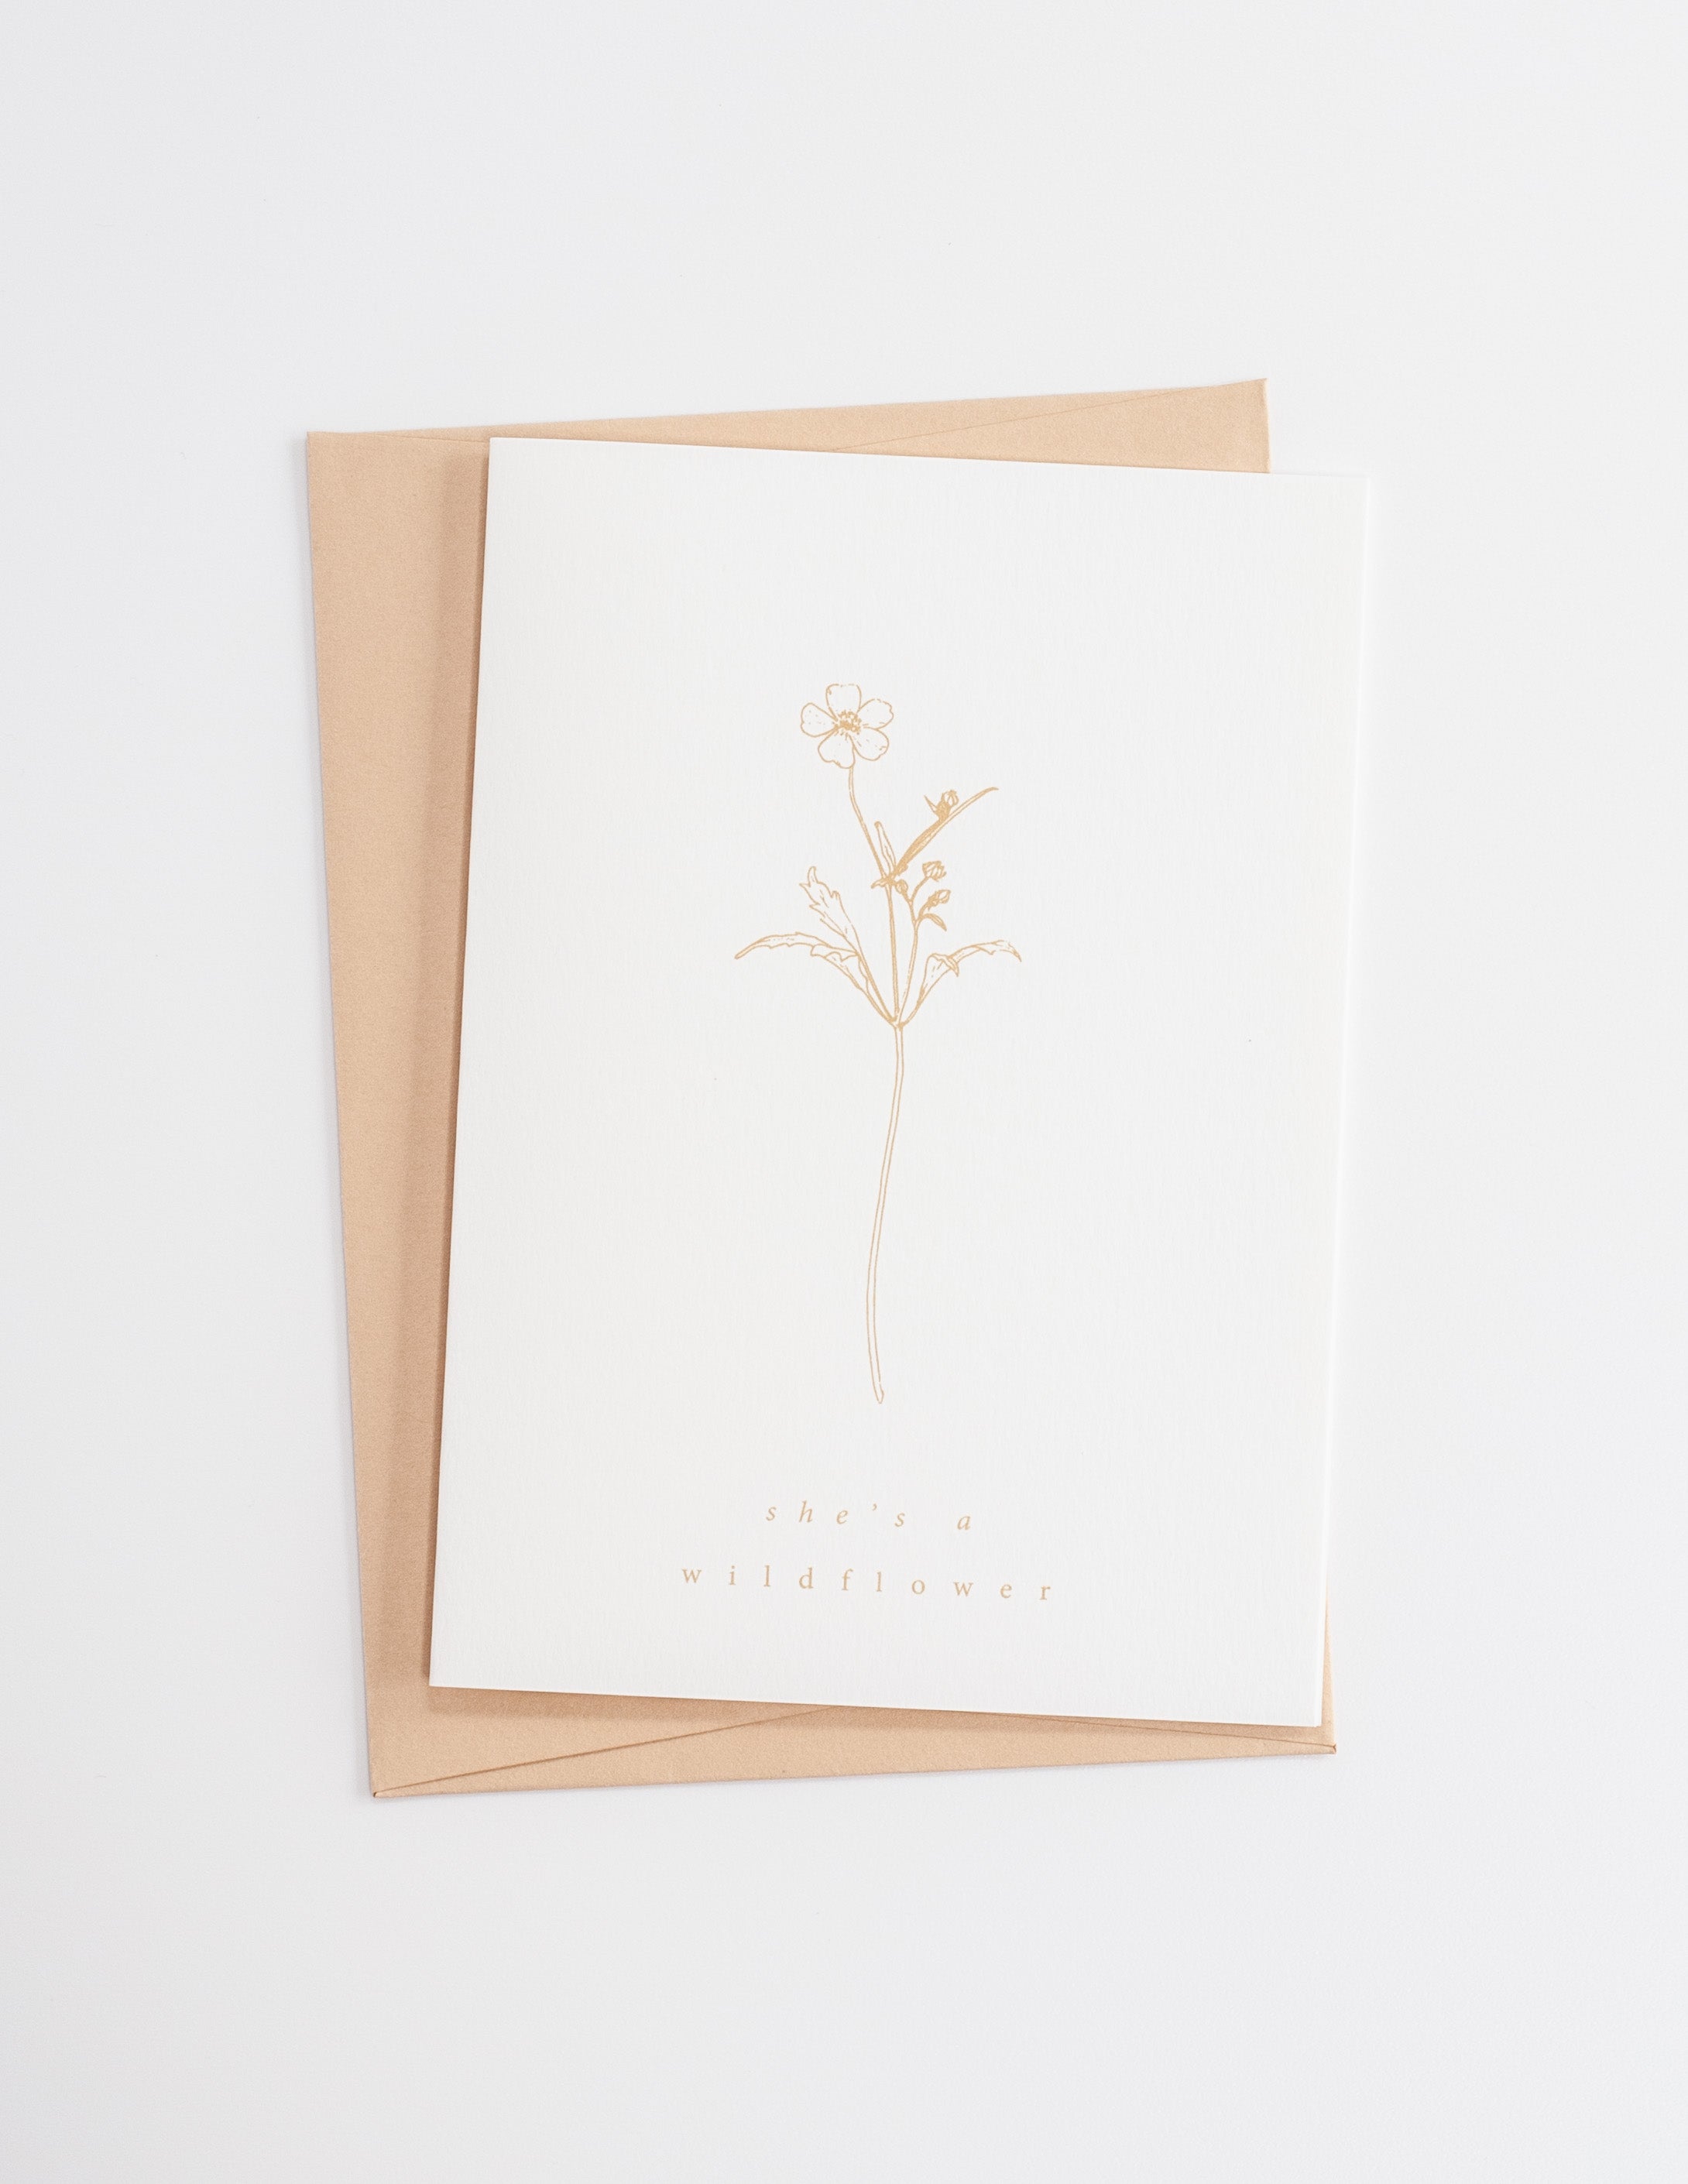 She’s a Wildflower. Illustrated Greetings Card.